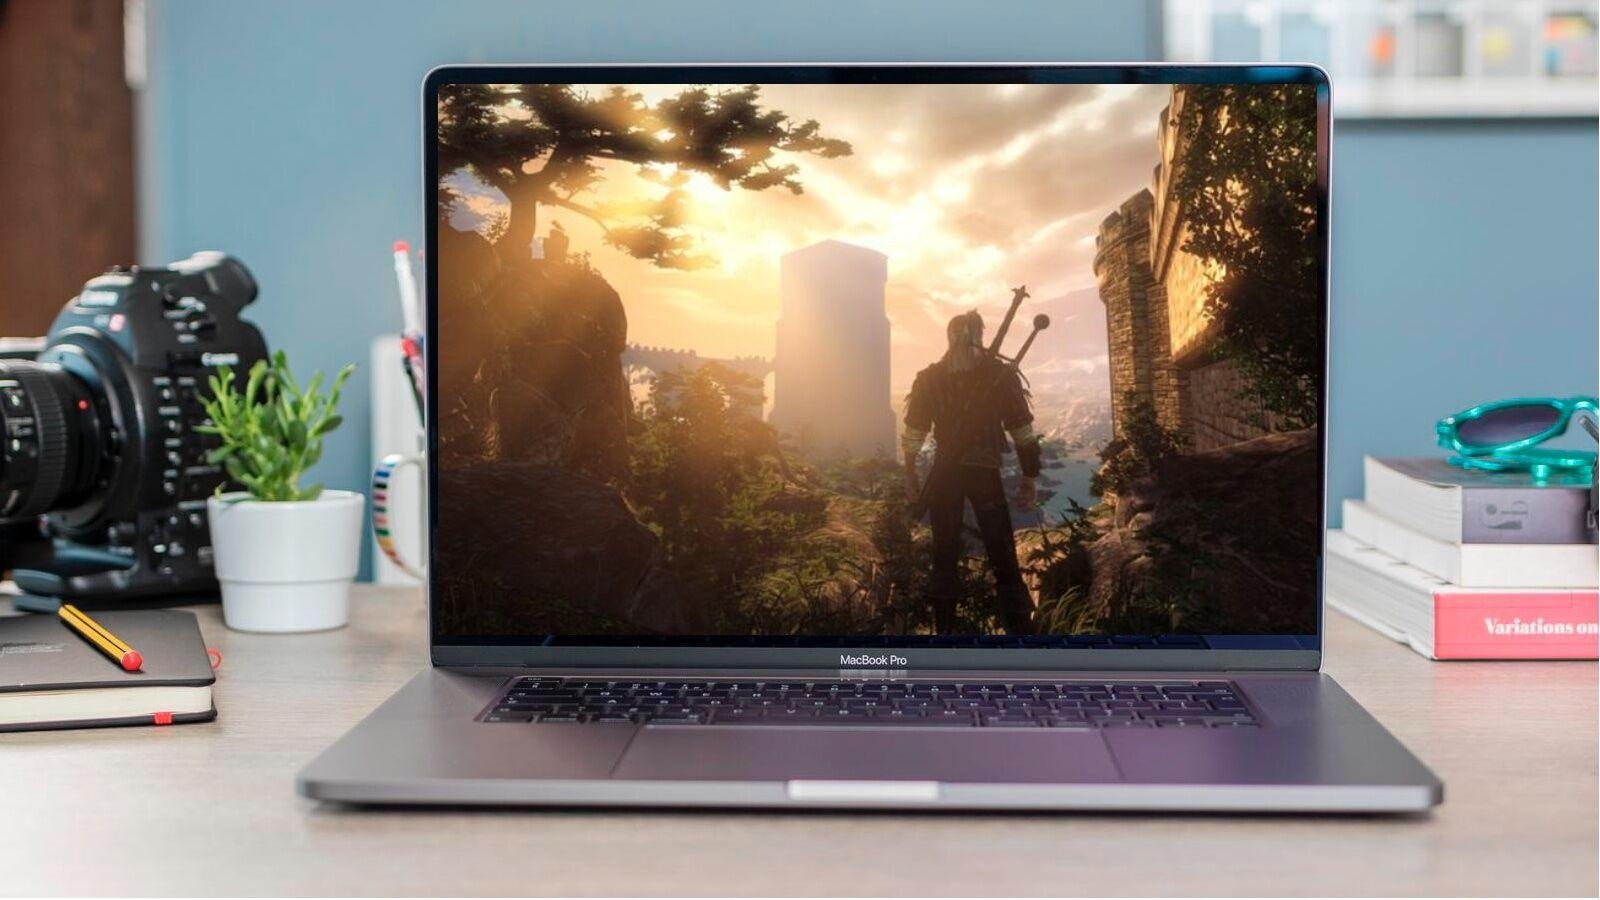 CrossOver announces DirectX 12 support coming to macOS